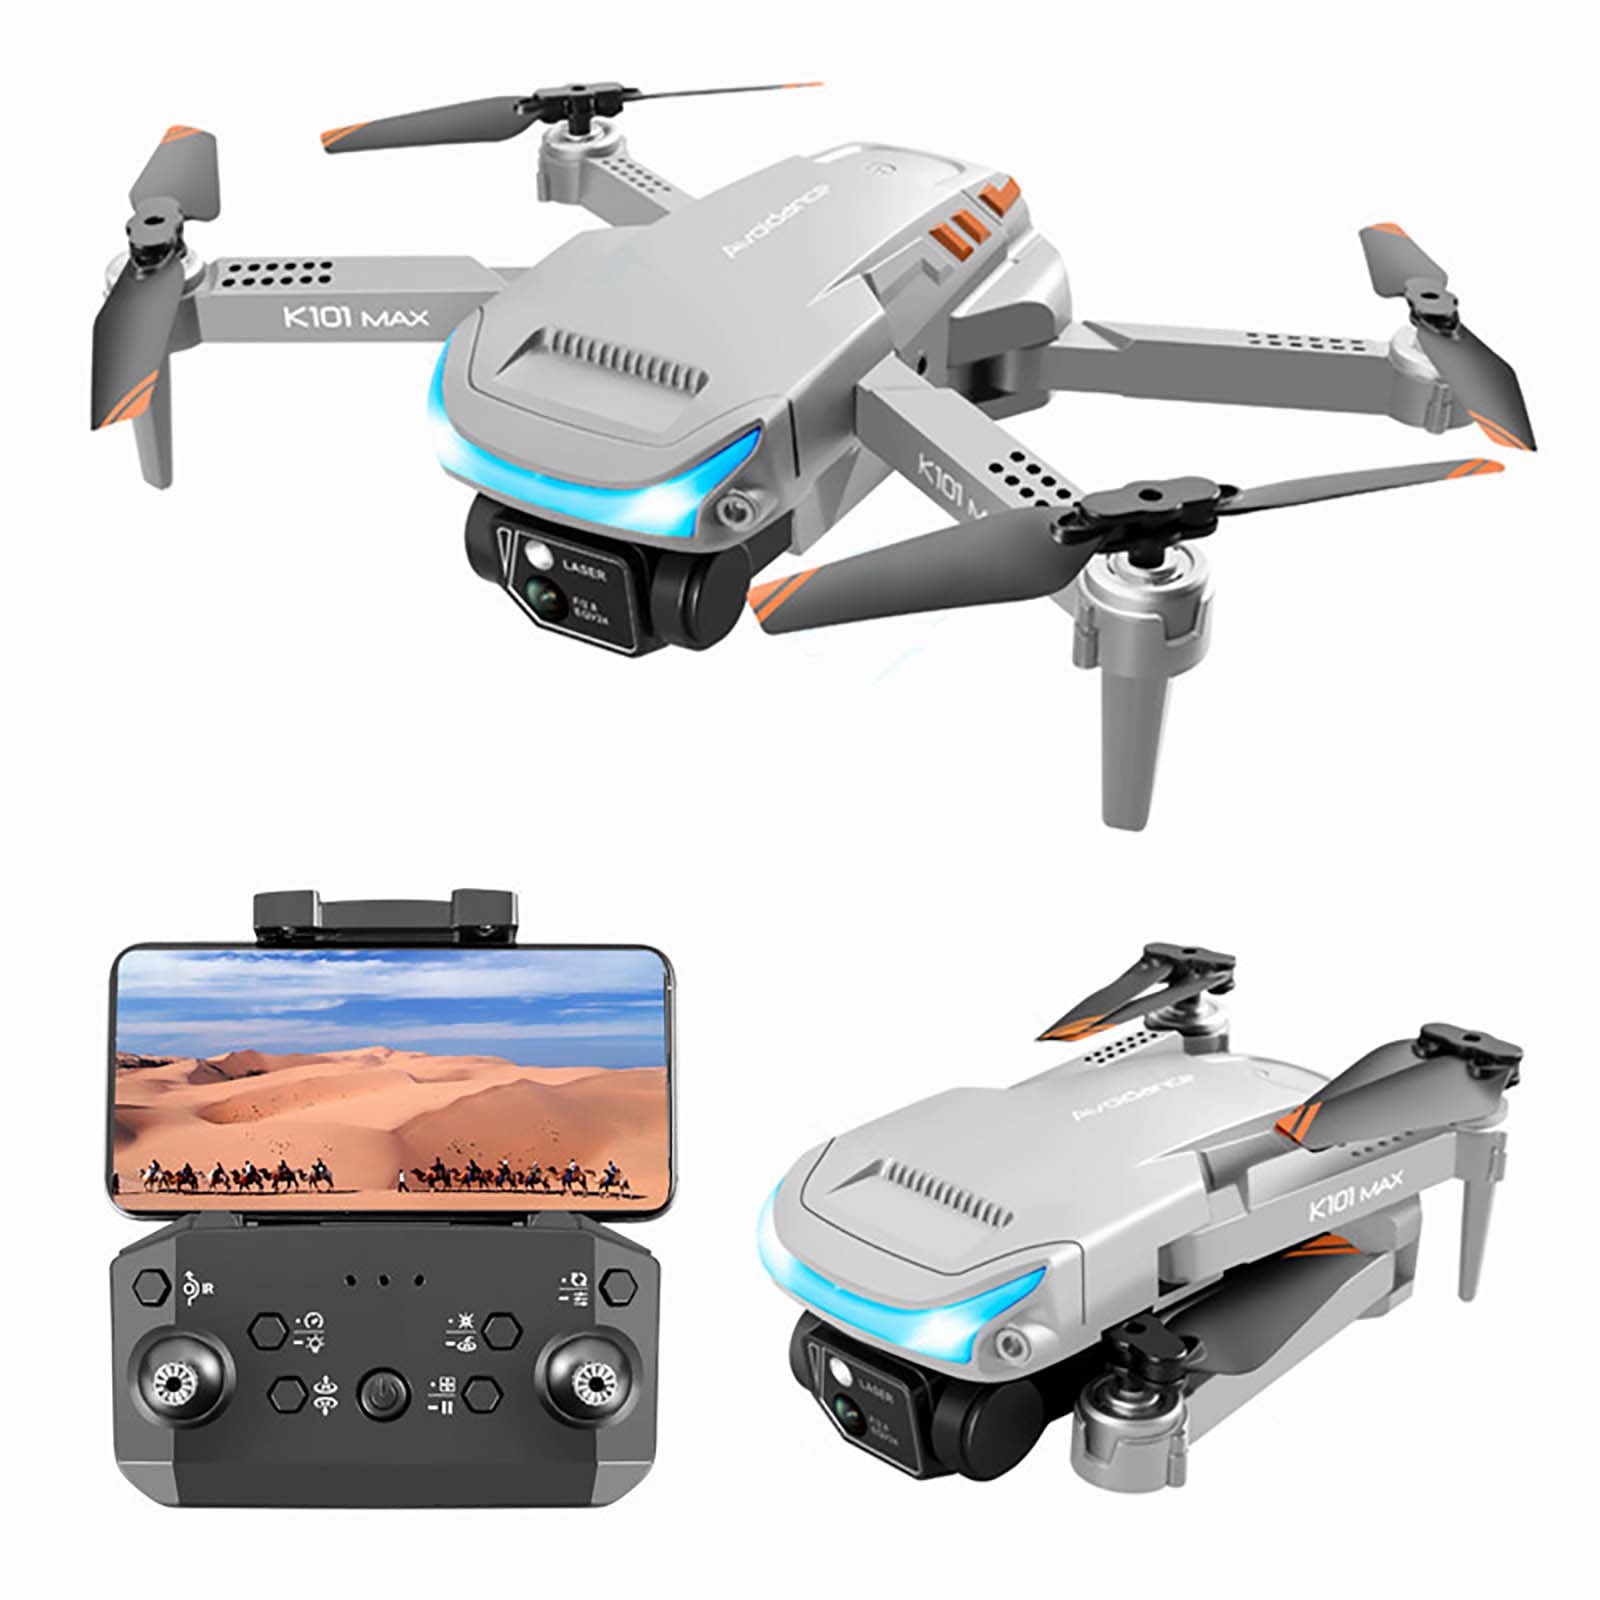 K101 max 4K Drone with obstacle avoidance + extra battery – Hybrid Drones